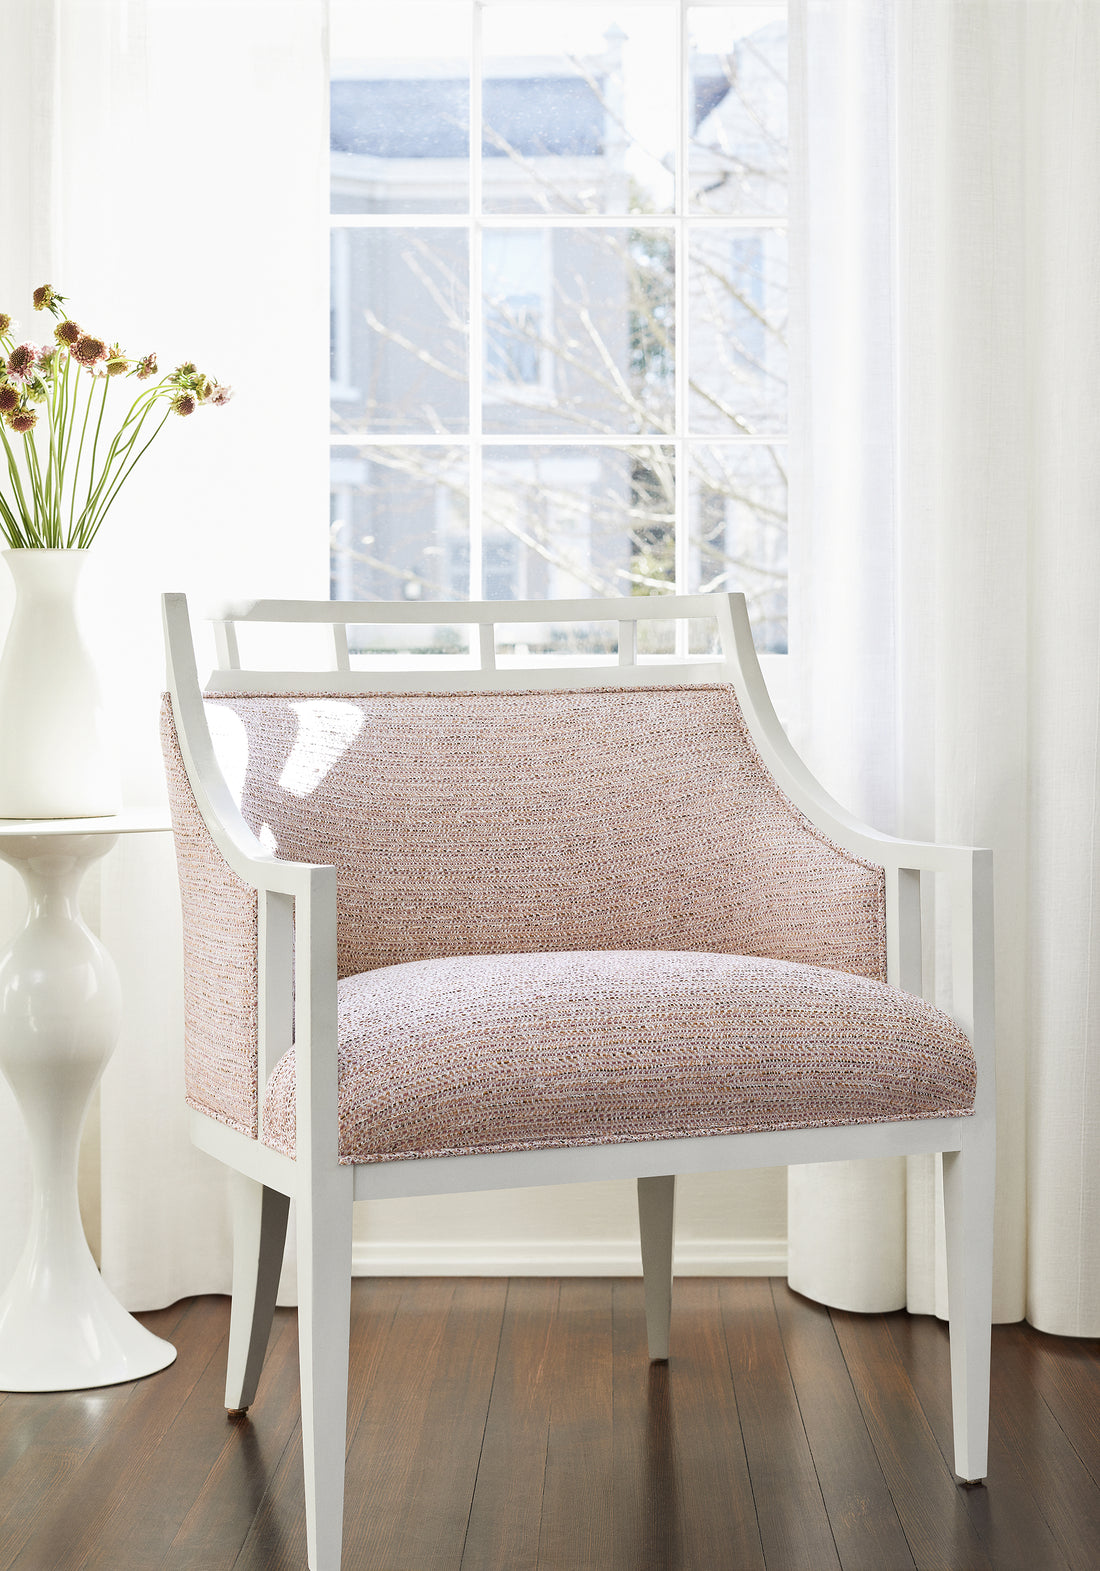 Malibu Chair in Thibaut Elements woven fabric in Blush color - pattern number W75246